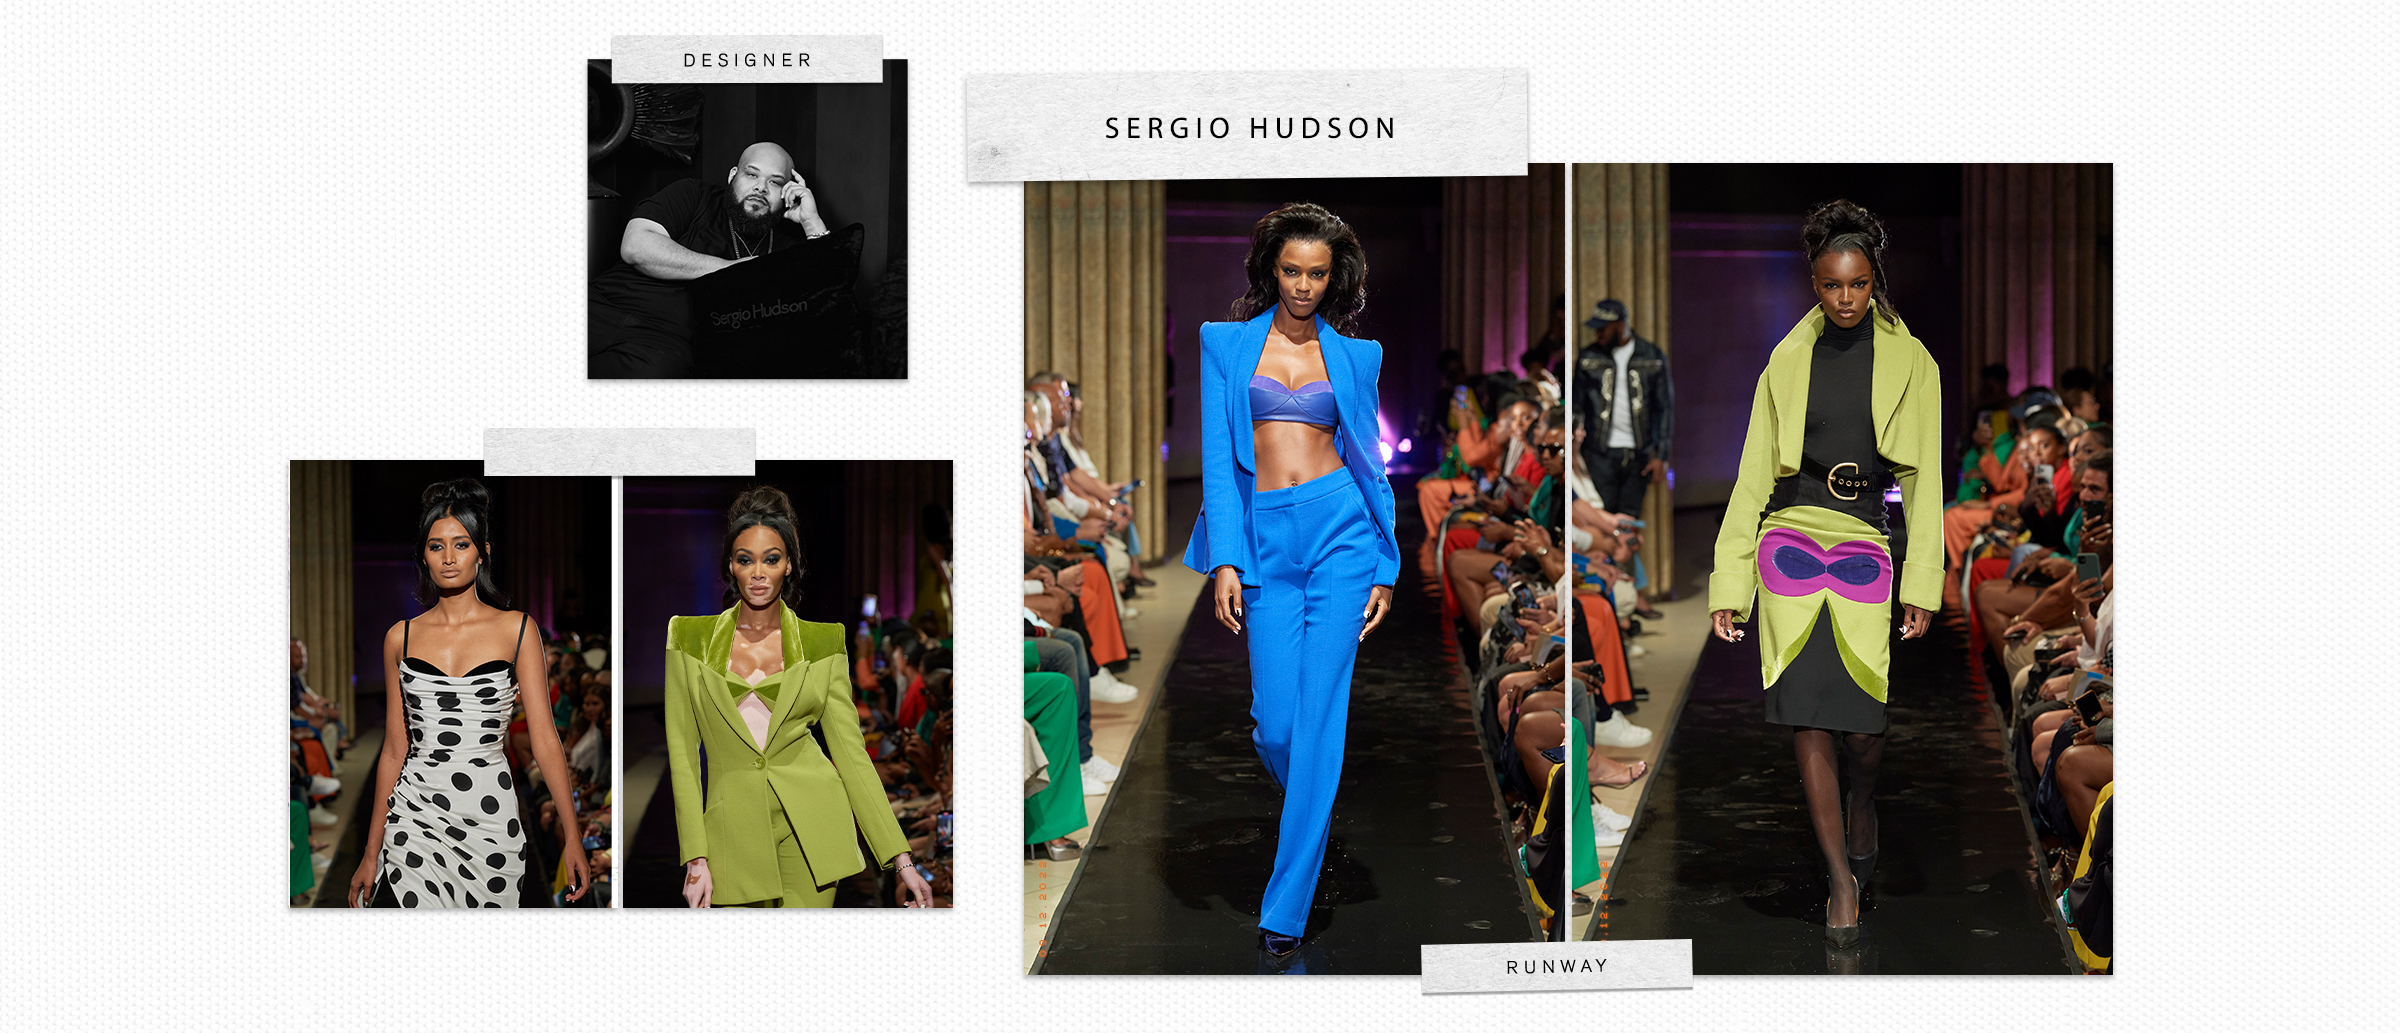 Fashion designer Sergio Hudson, and his most recent spring/summer 2023 collection